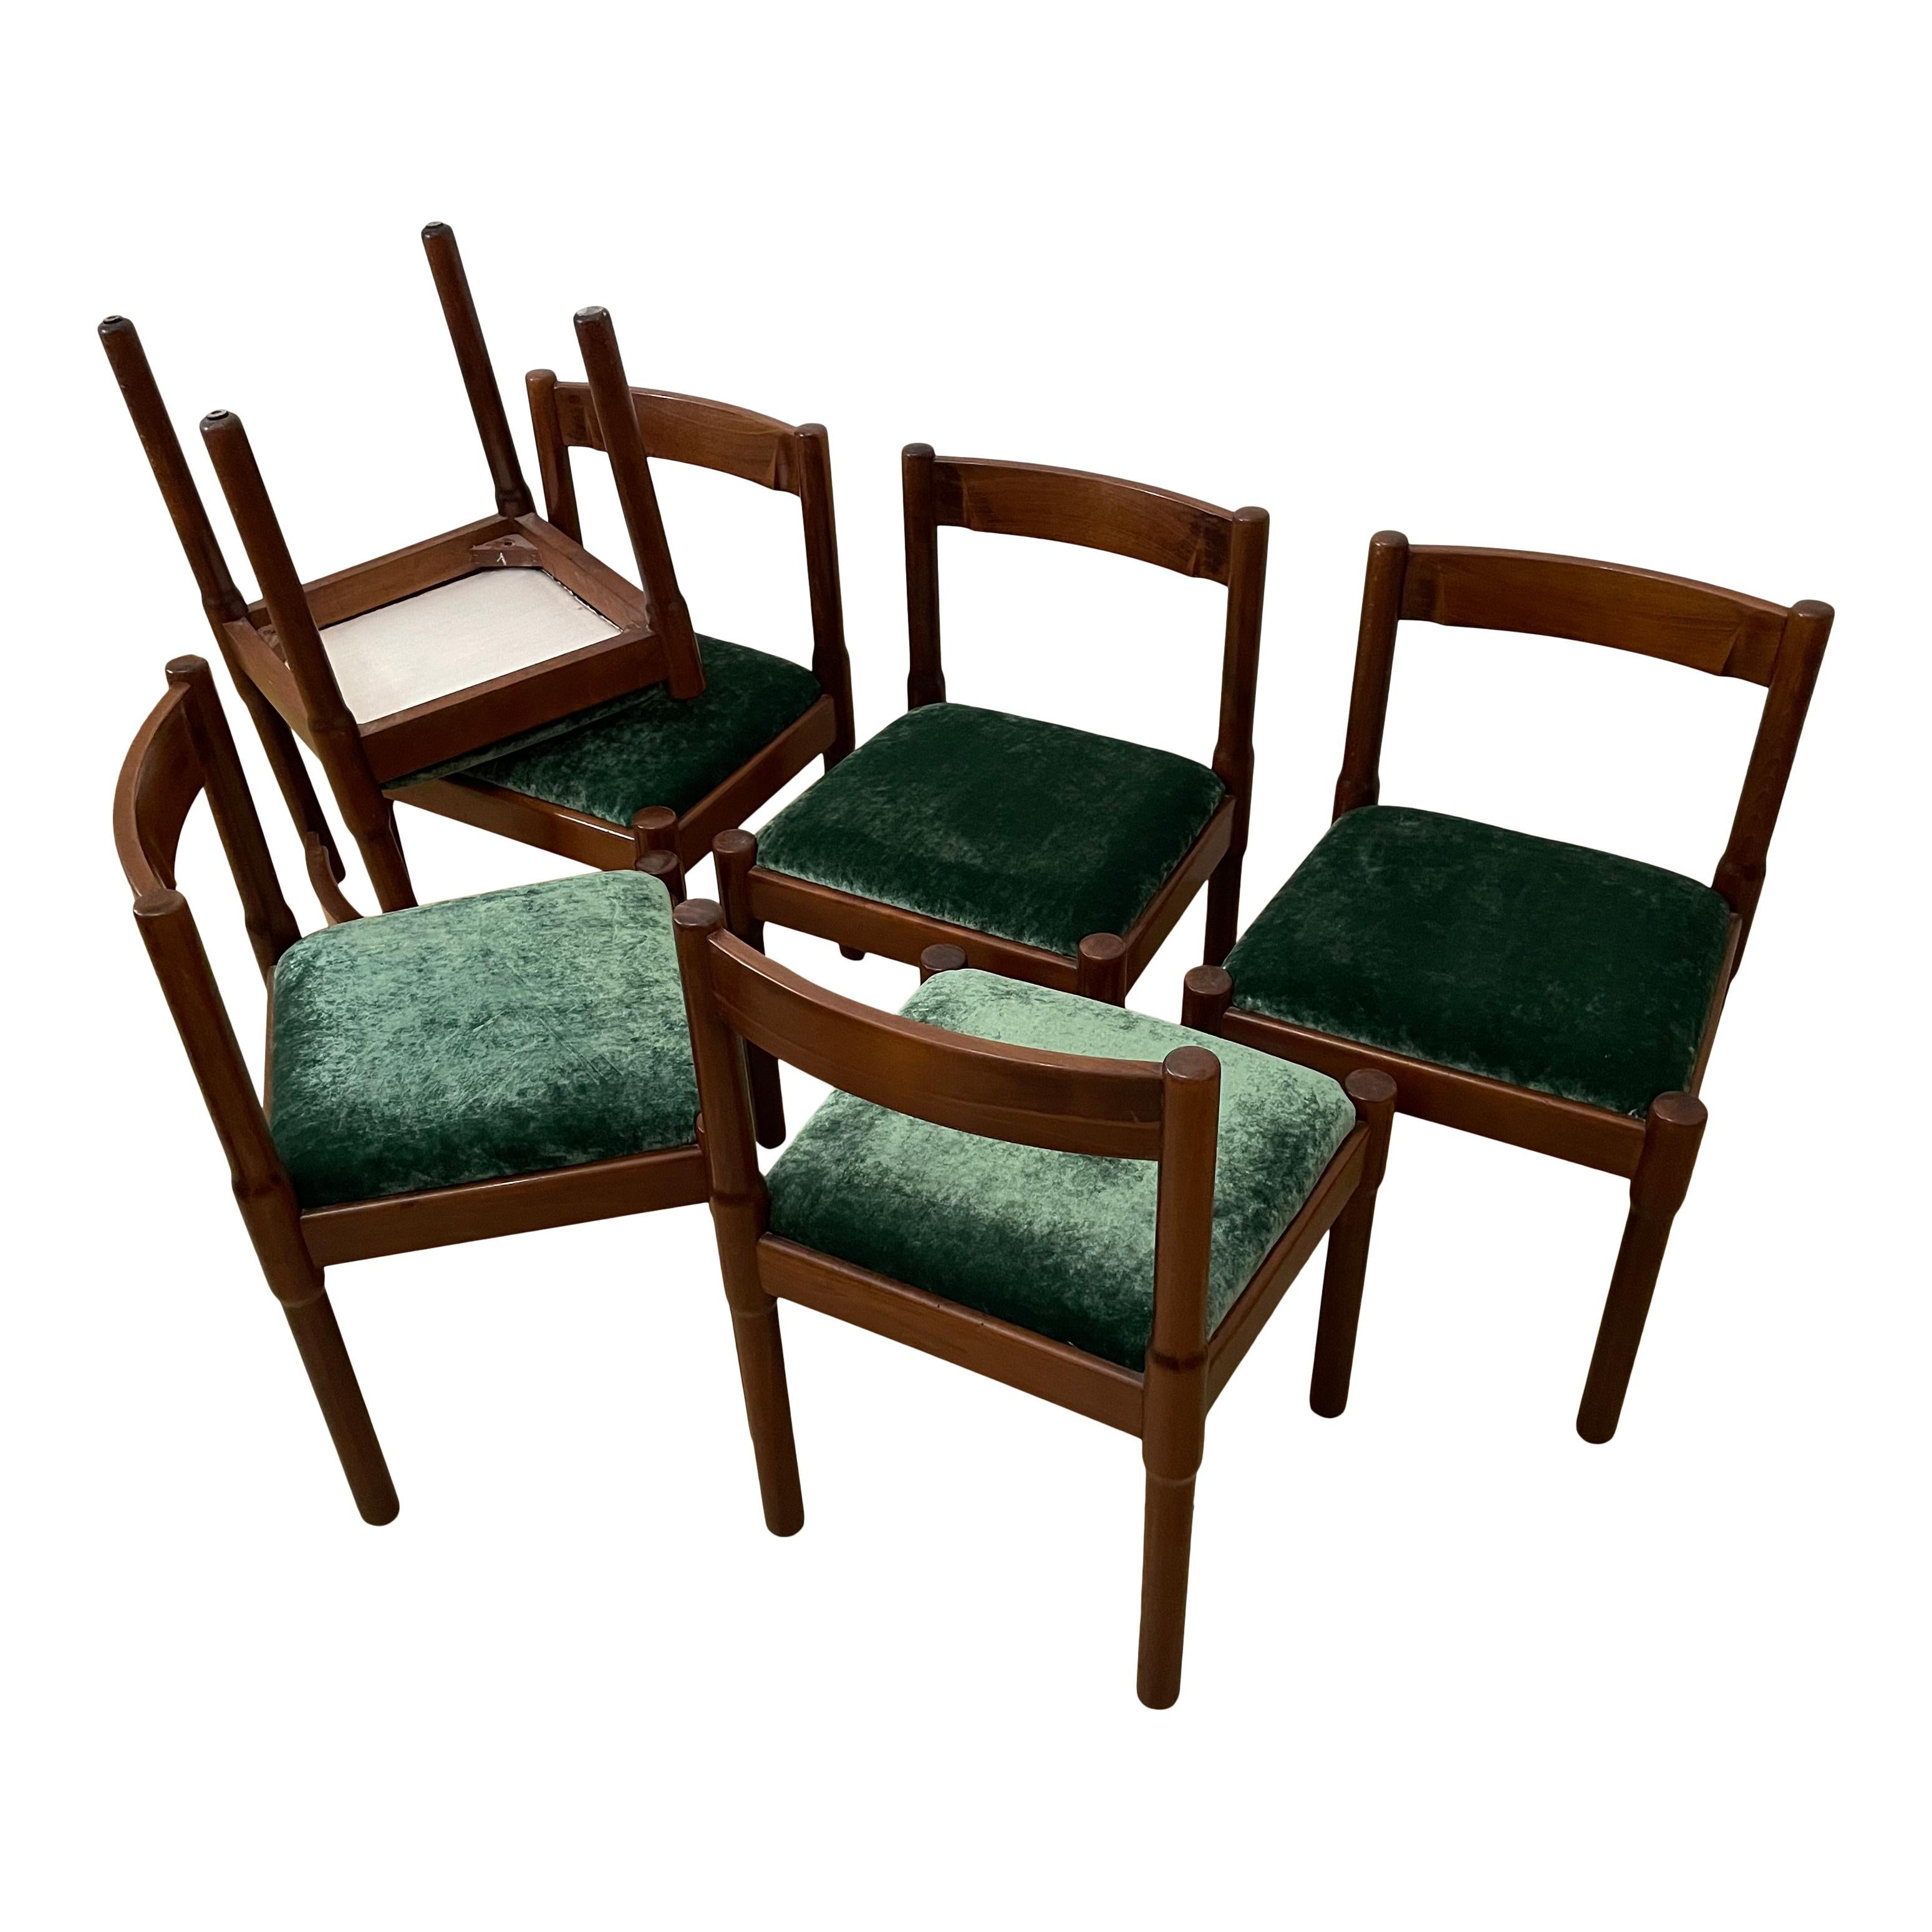  Set of 4 “Carimate” chairs designed by Vico Magistretti and produced by Cassina in 1963.

Initially commissioned for the Carimate Golf club near Milan, they were then produced for the public by Cassina.

Structure in brown beechwood, seating in